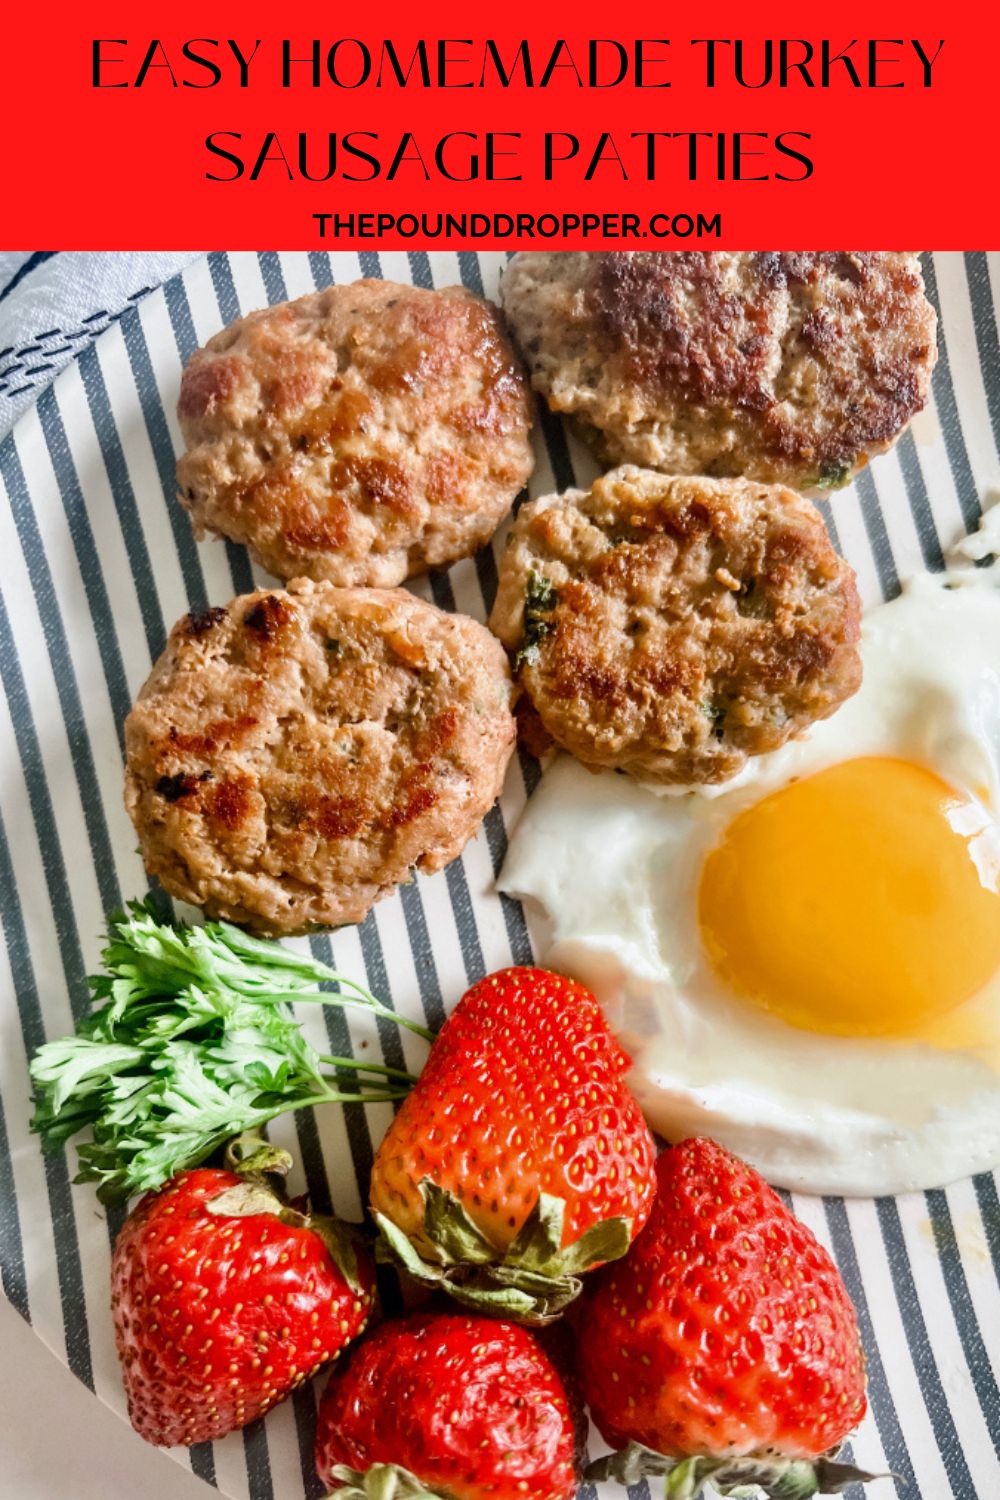 These Homemade Turkey Breakfast Sausage Patties are a healthier homemade alternative to store bought Jimmy Dean Patties.  Turkey sausage patties are in points, low-carb, and full of nutritious protein and savory flavor-perfect to on hand and ready to go when you need them!  Serve with your favorite breakfast items, inside a breakfast burritos, wrap, or sandwich. via @pounddropper